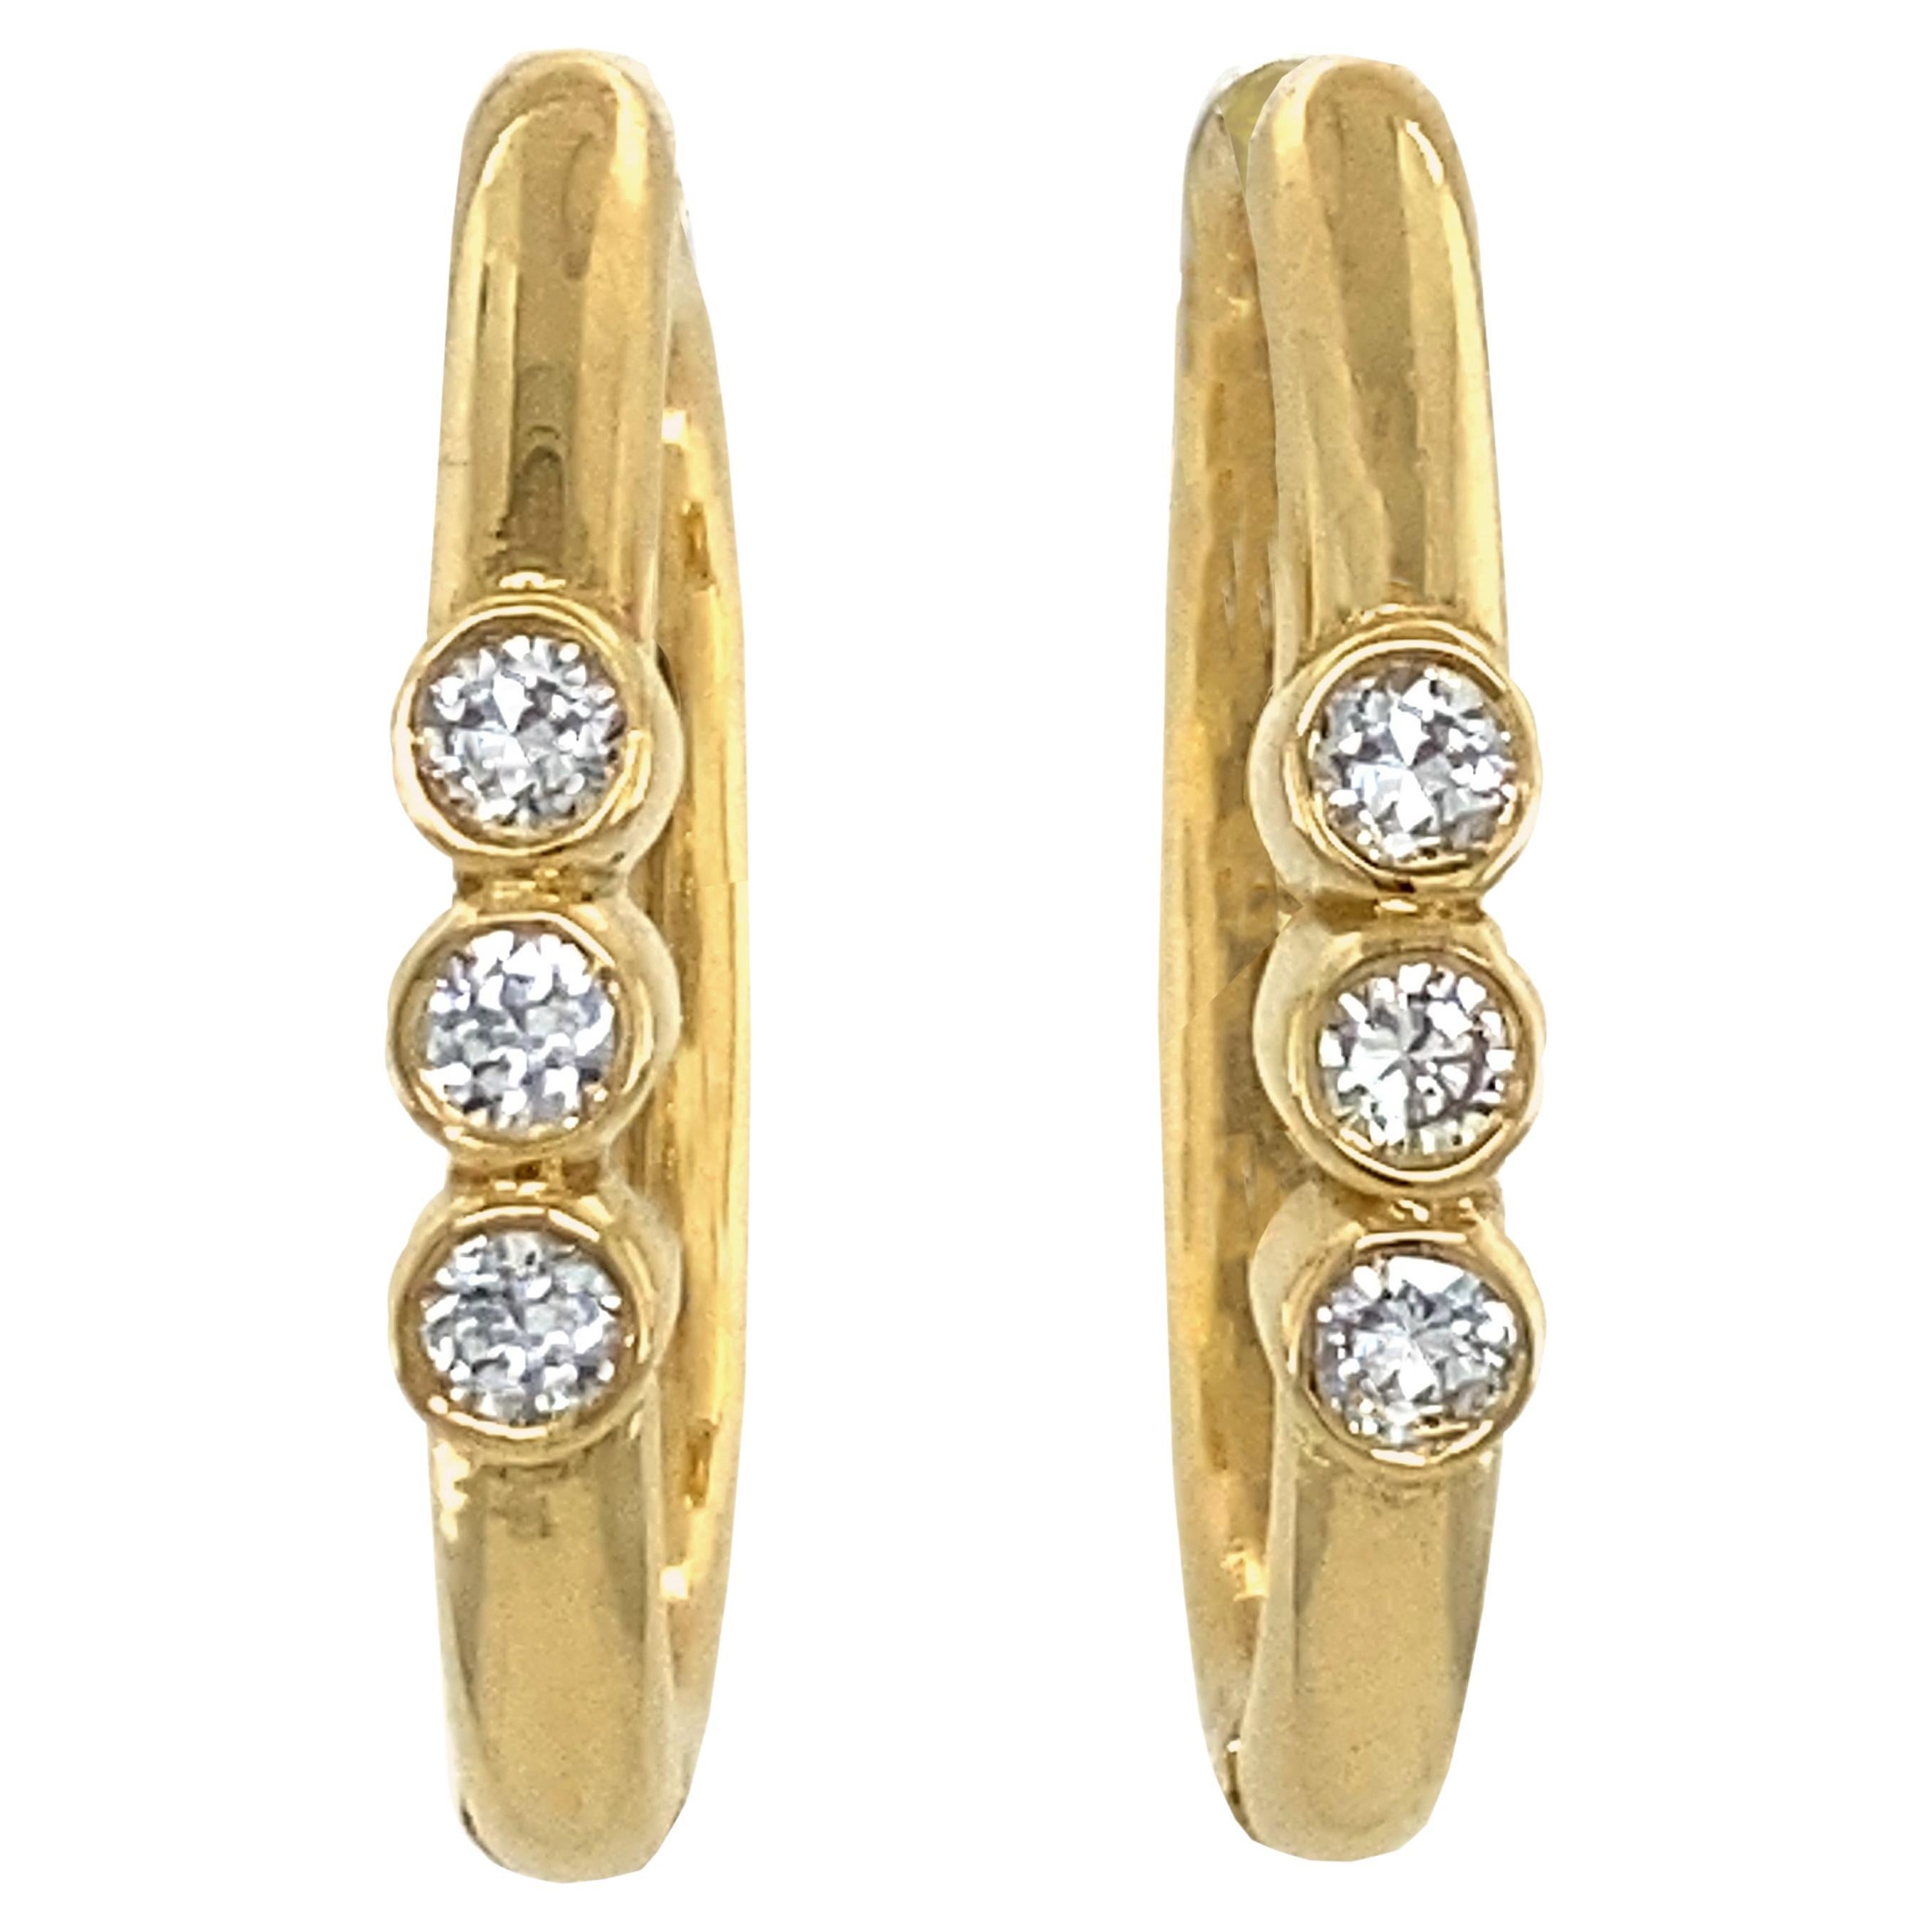 "Double Triplets" Oval Hoops Accented with Diamonds in 18 Karat Yellow Gold